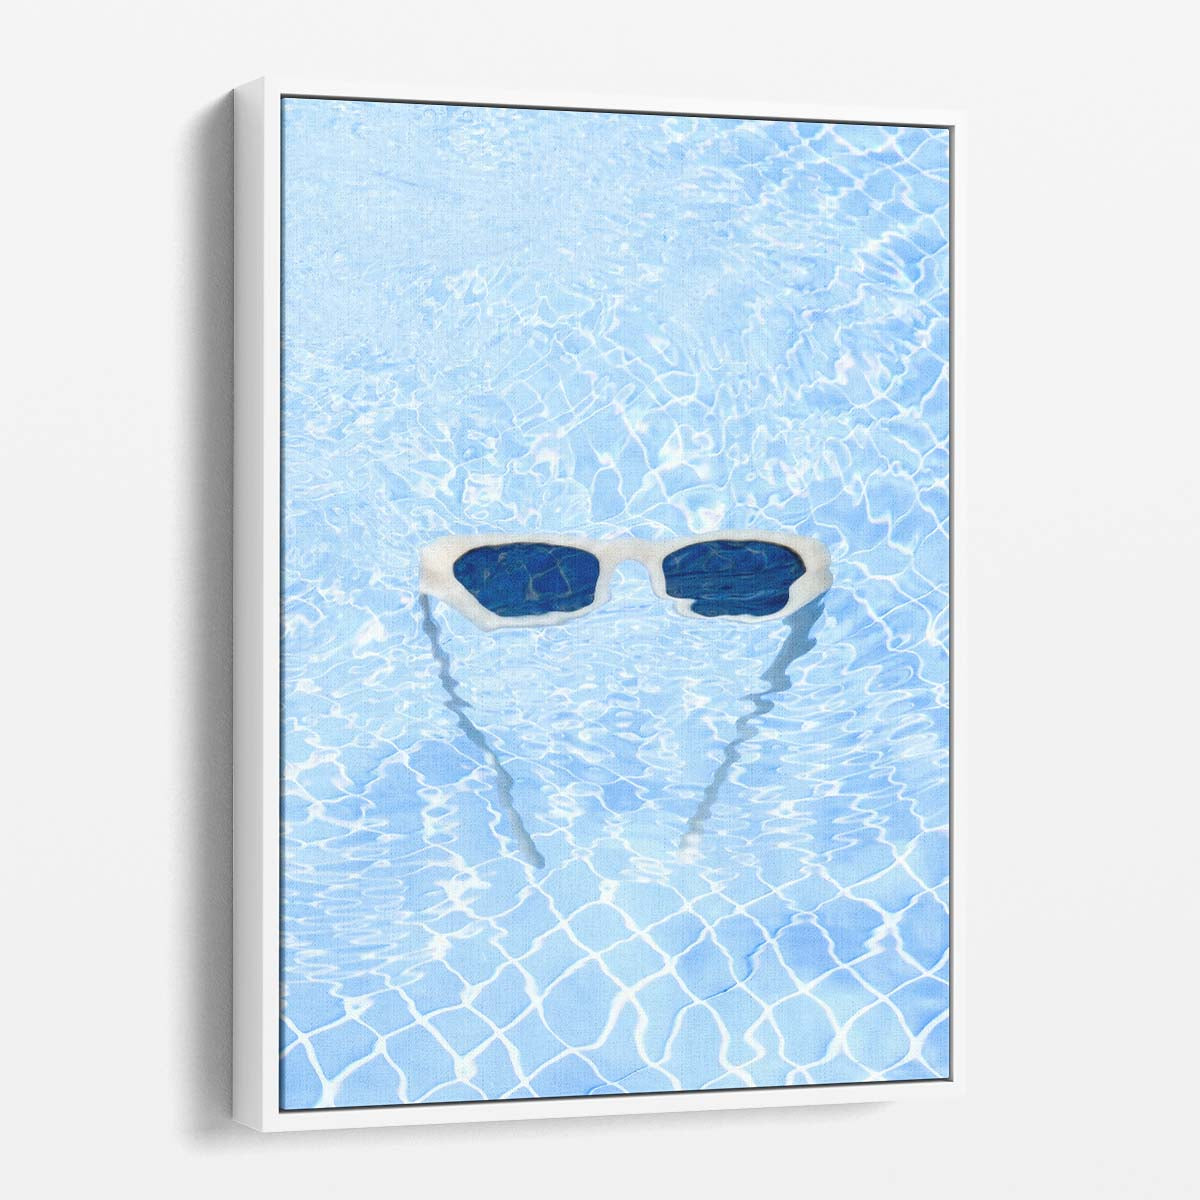 Blue Pool Water, Floating Sunglasses Summer Vacation Photography by Luxuriance Designs, made in USA